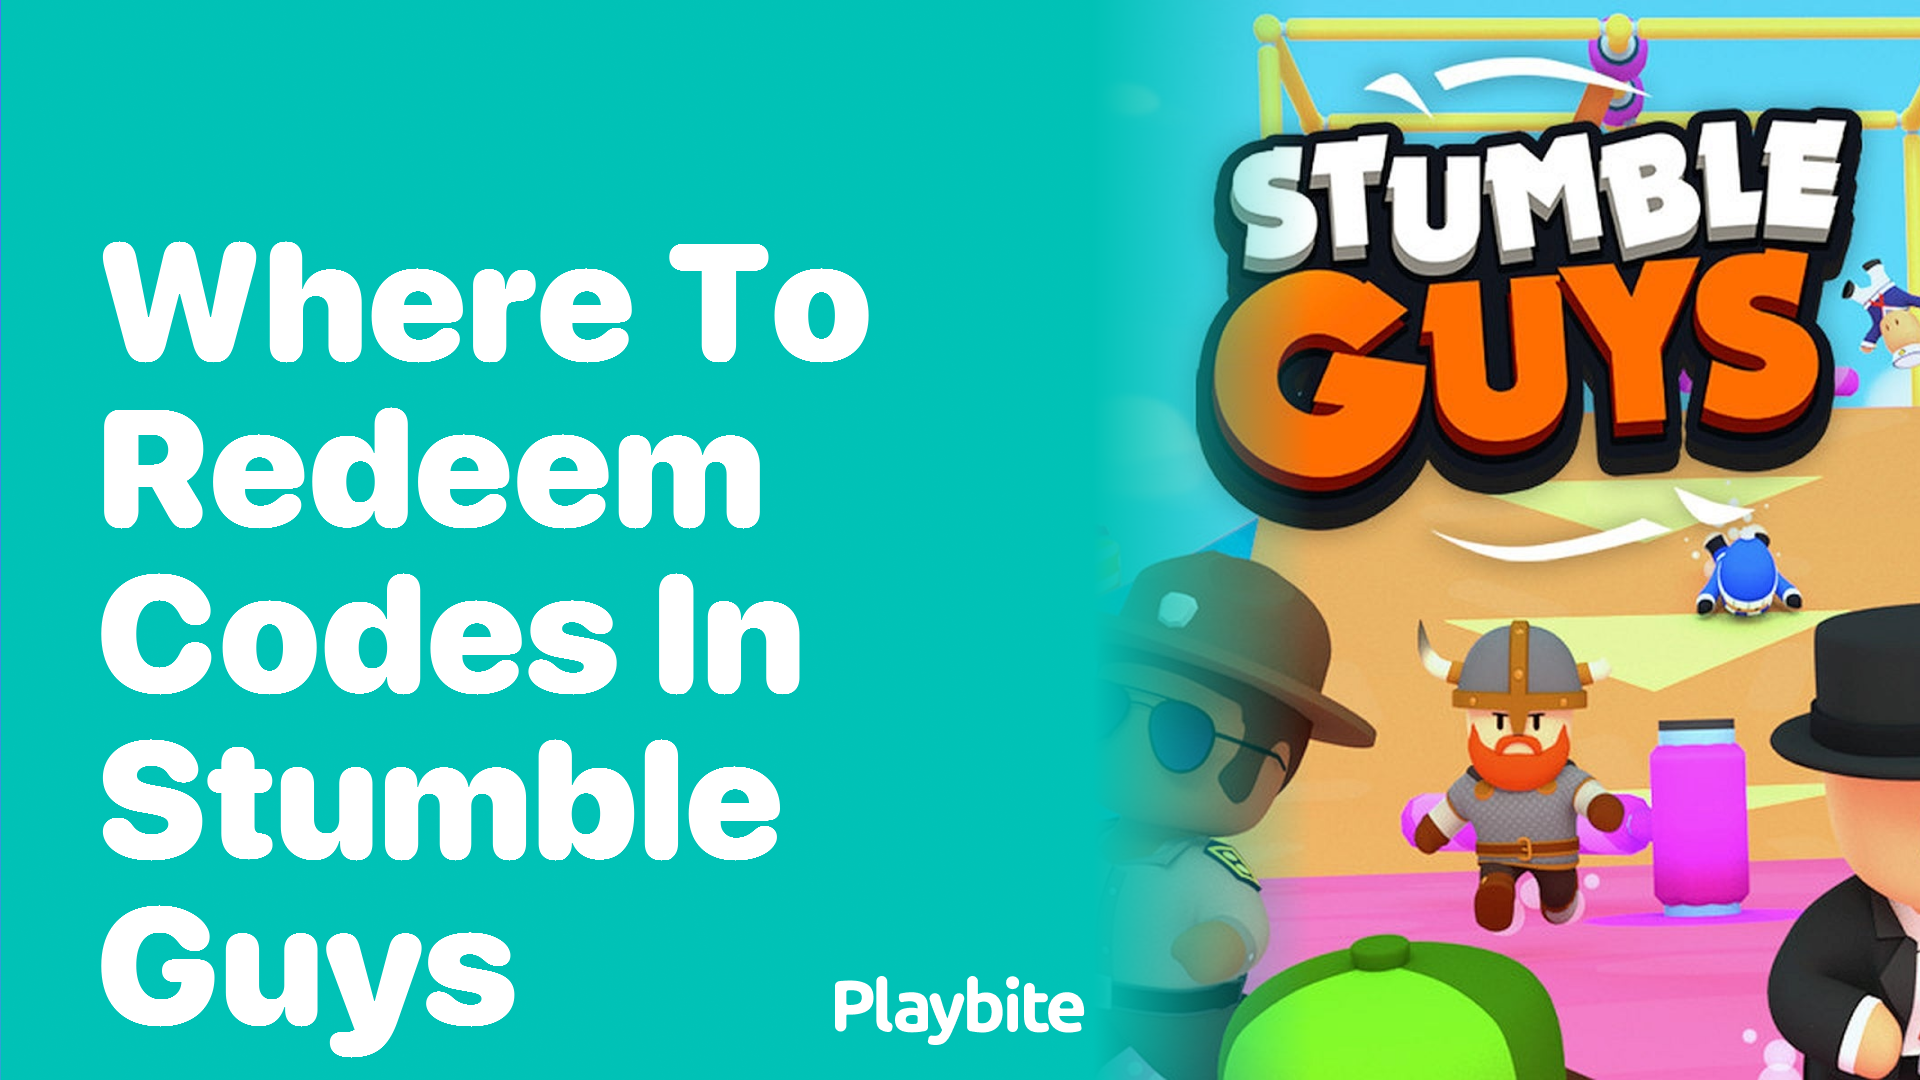 Where to Redeem Codes in Stumble Guys?